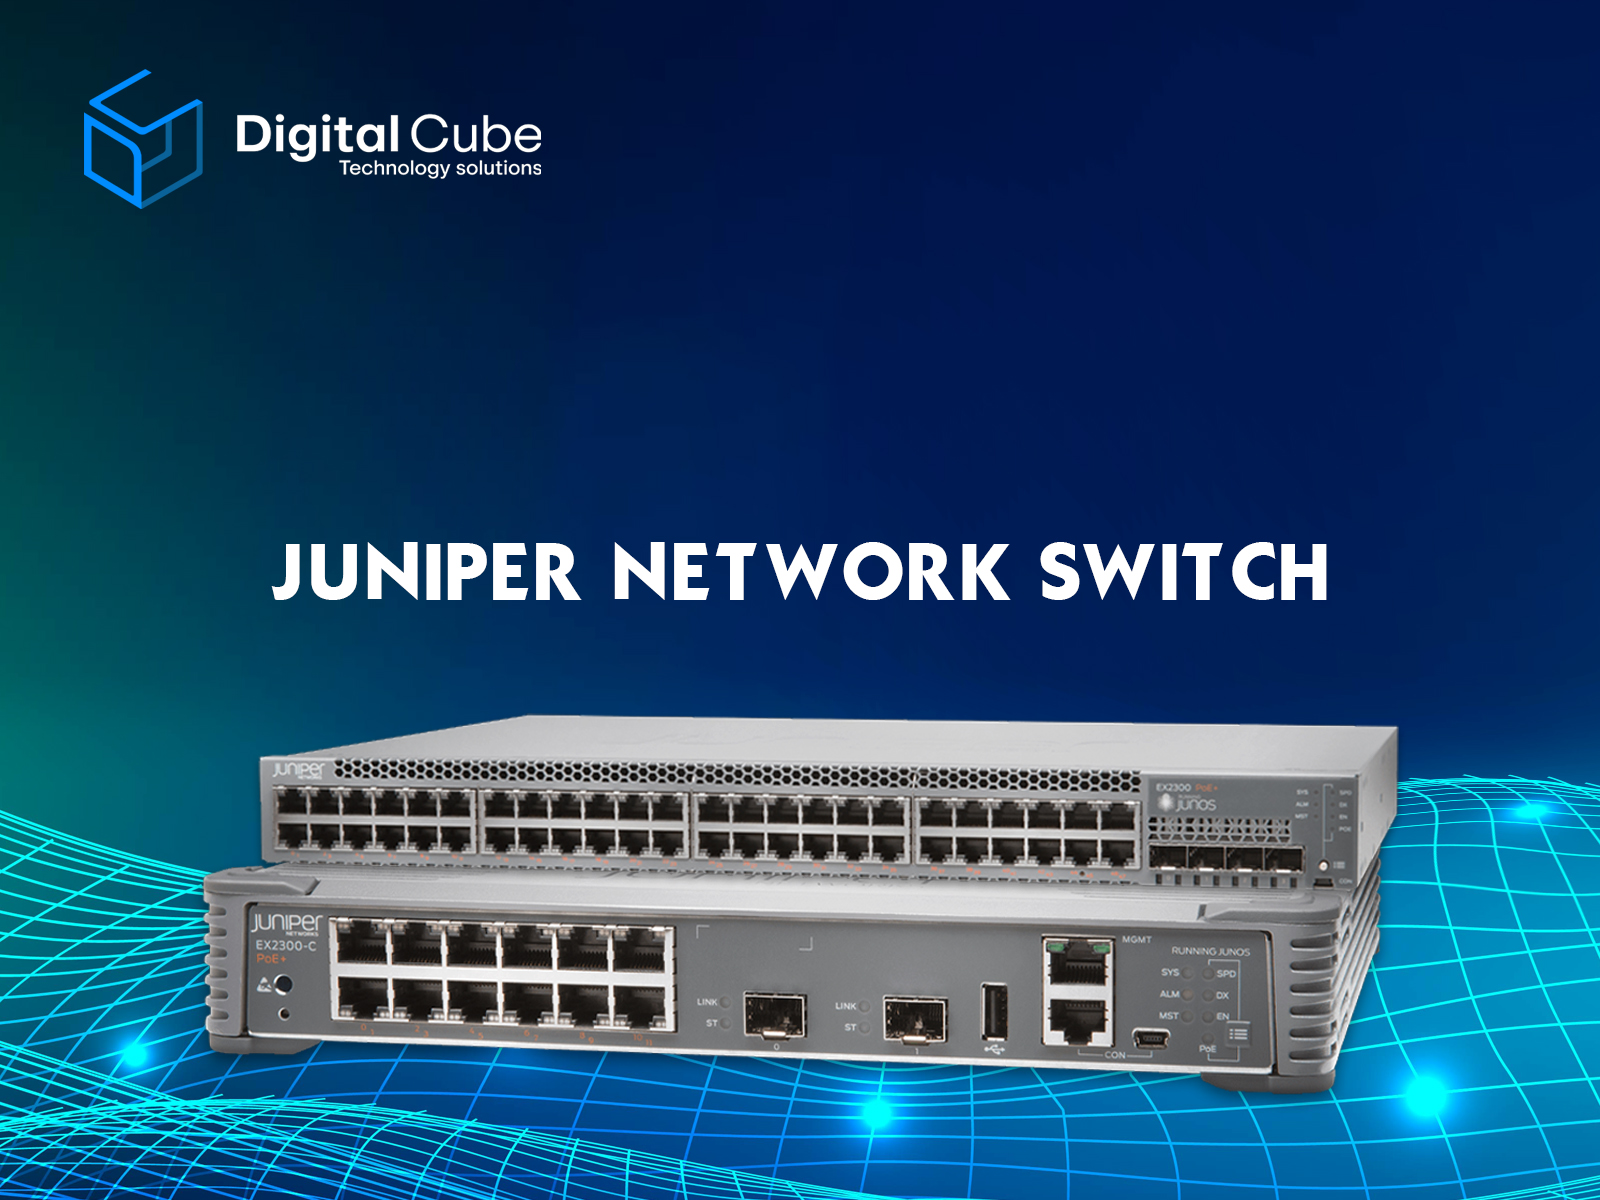 Ensure Lower Power Consumption in Juniper Network Switch